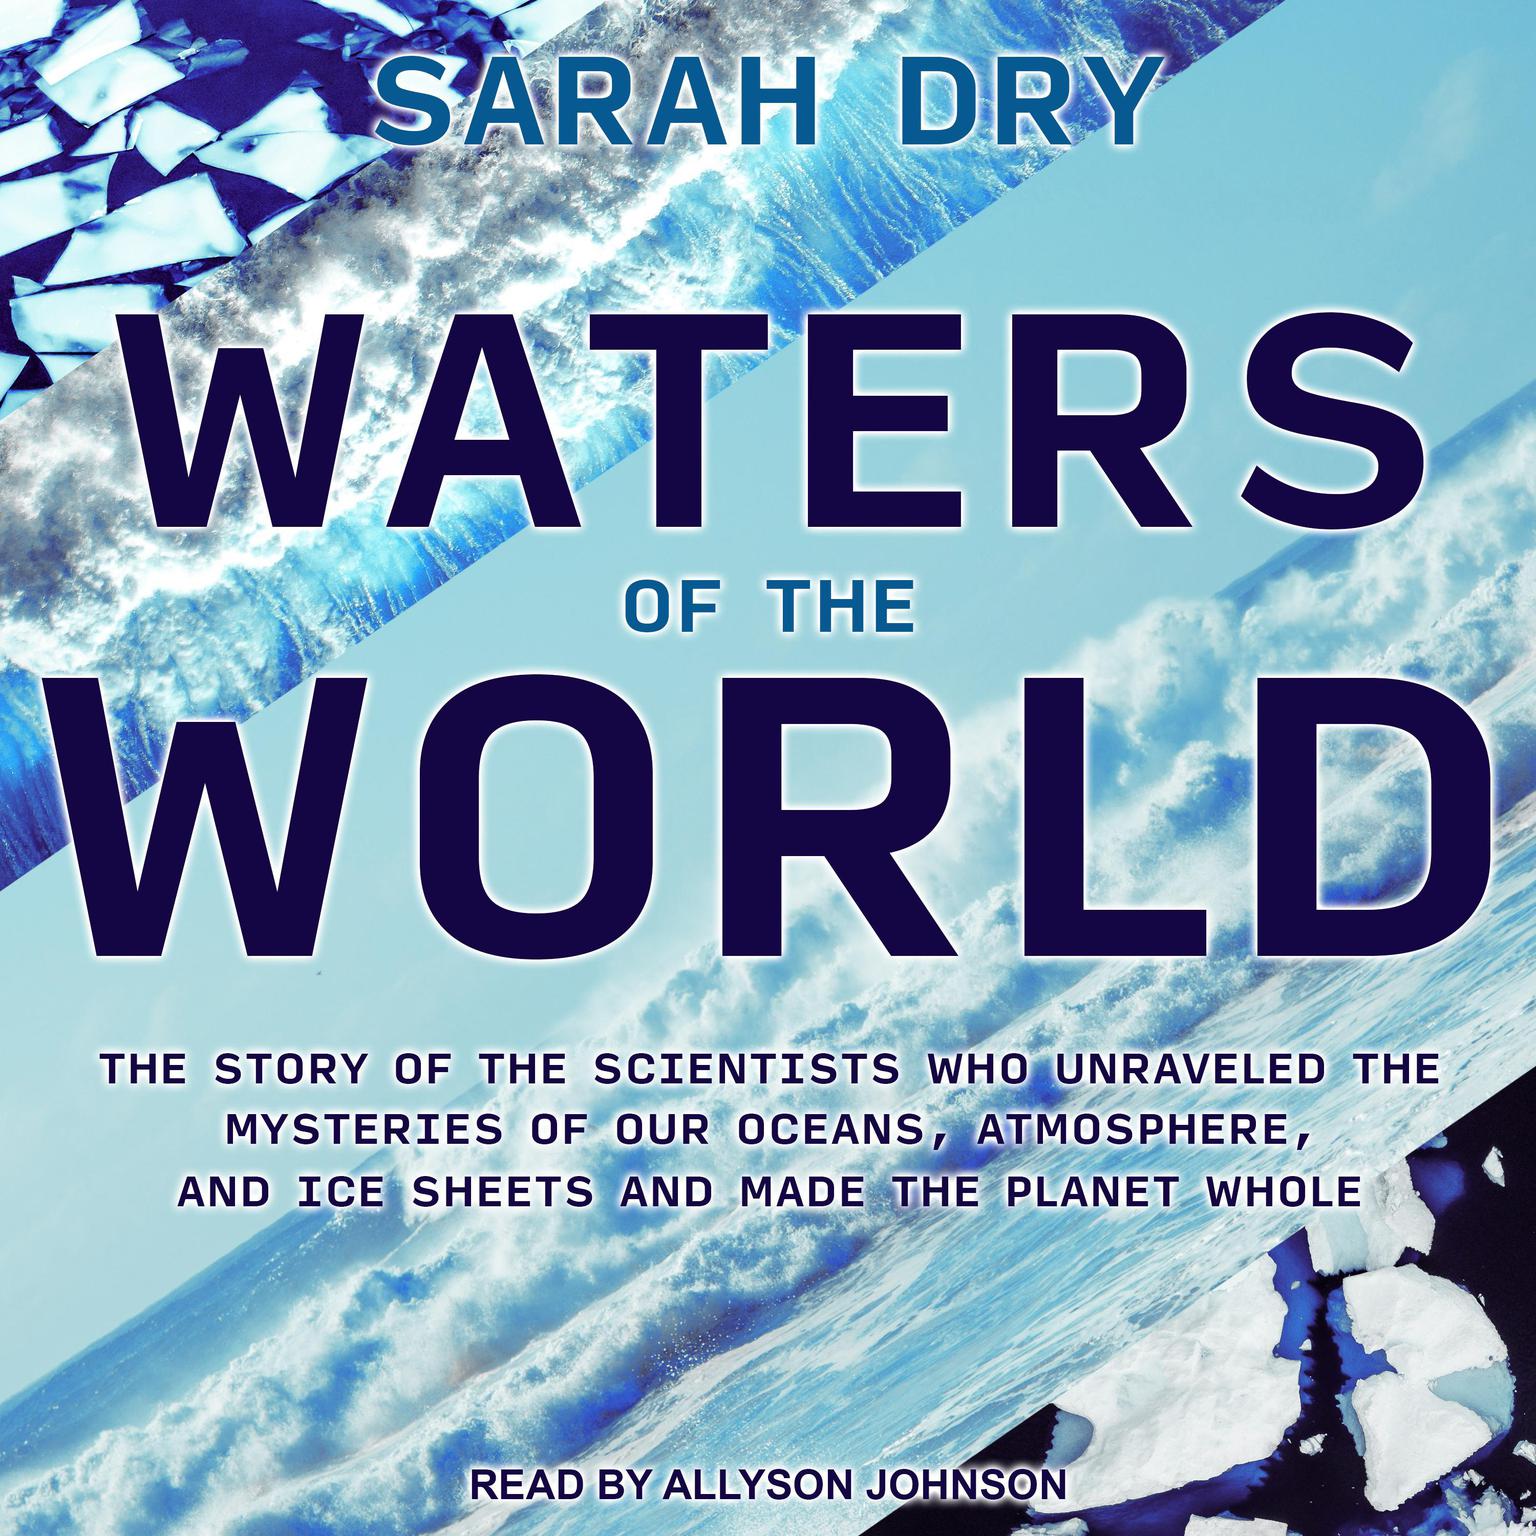 Waters of the World: The Story of the Scientists Who Unraveled the Mysteries of Our Oceans, Atmosphere, and Ice Sheets and Made the Planet Whole Audiobook, by Sarah Dry